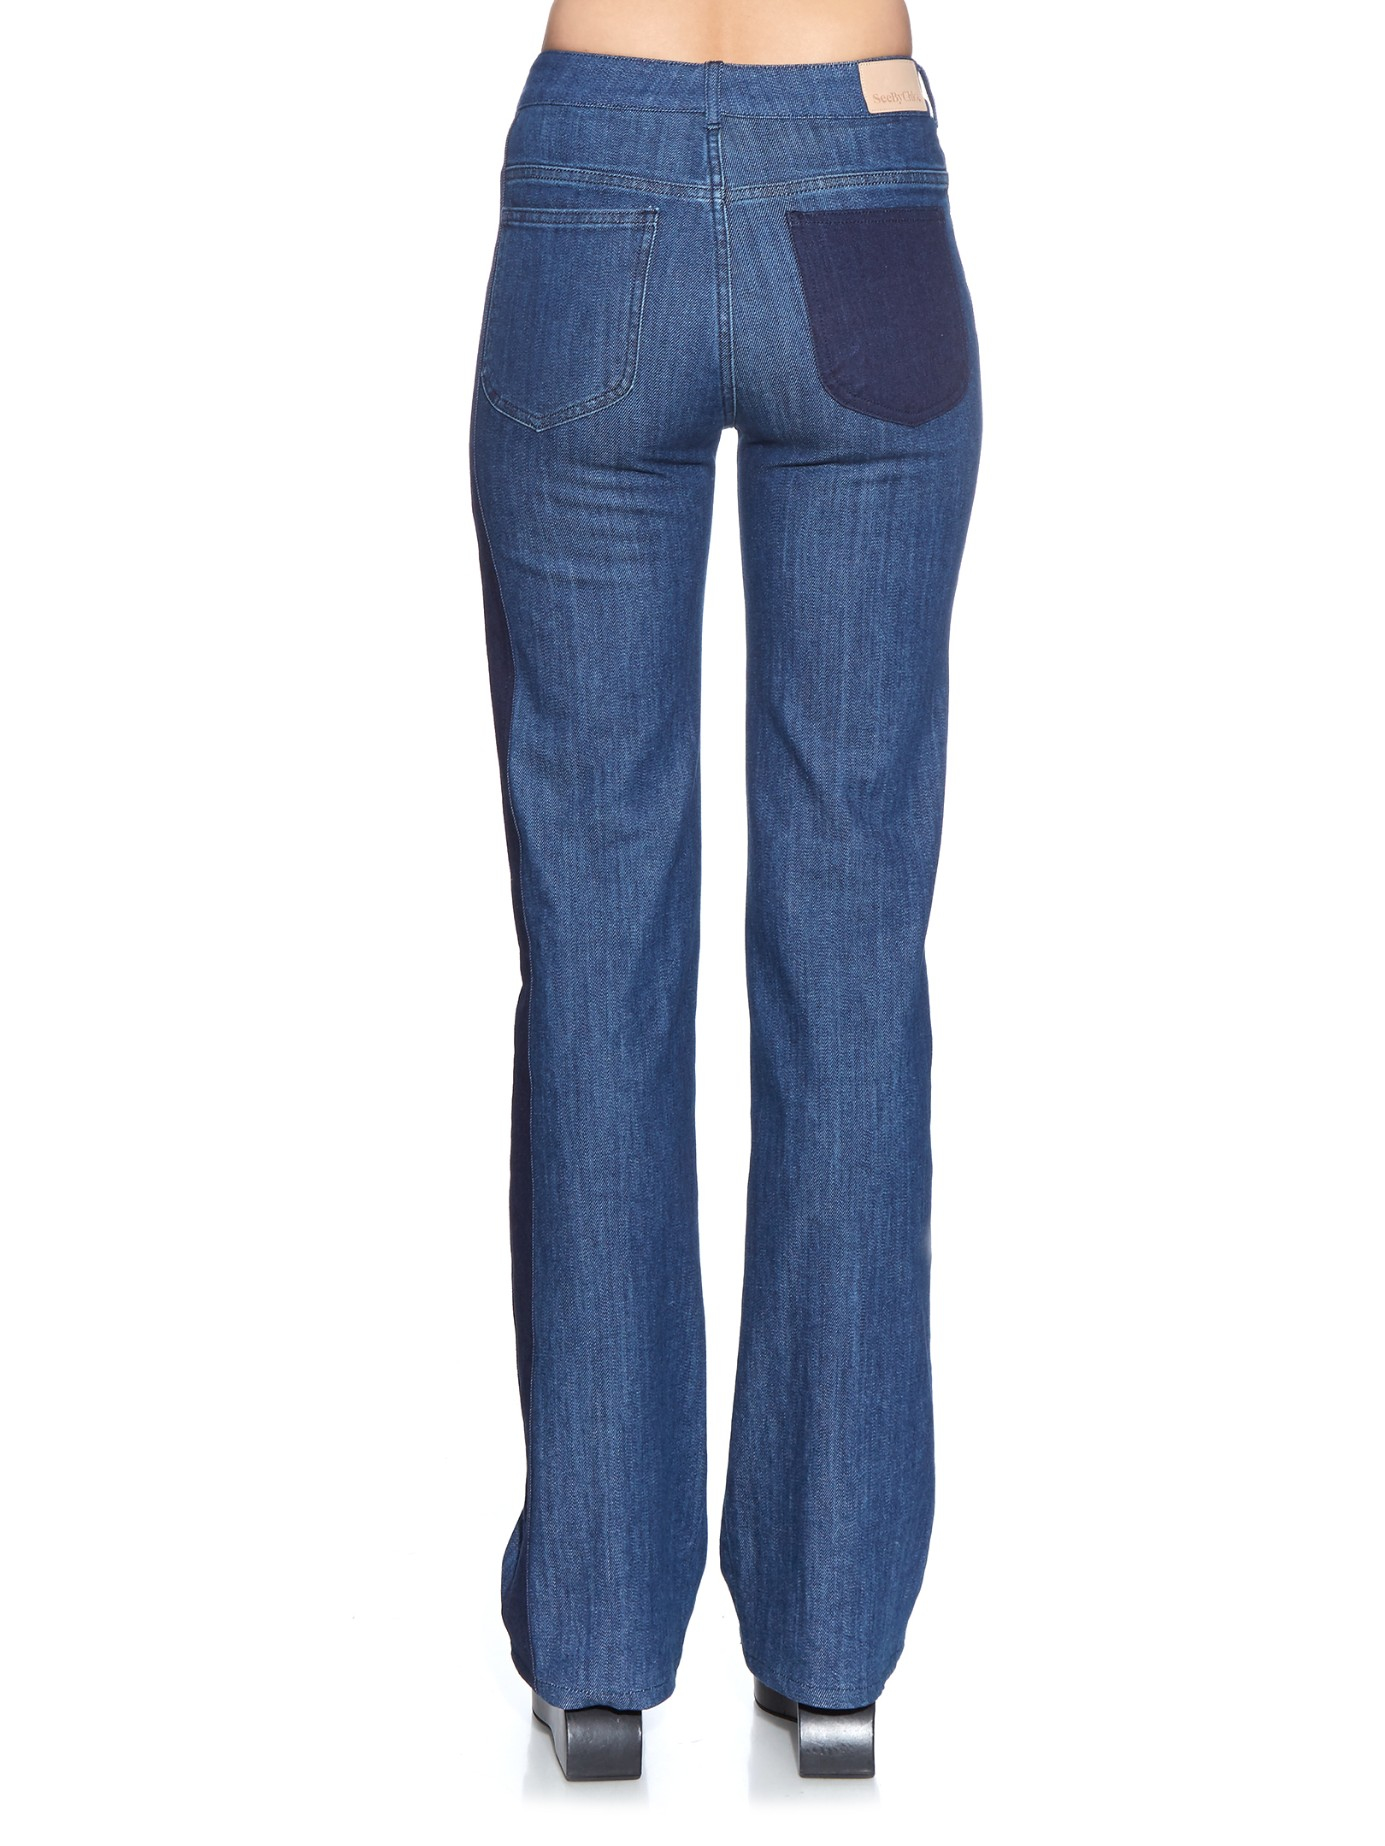 See By Chloé Patchwork Denim Wide-leg Jeans in Blue - Lyst